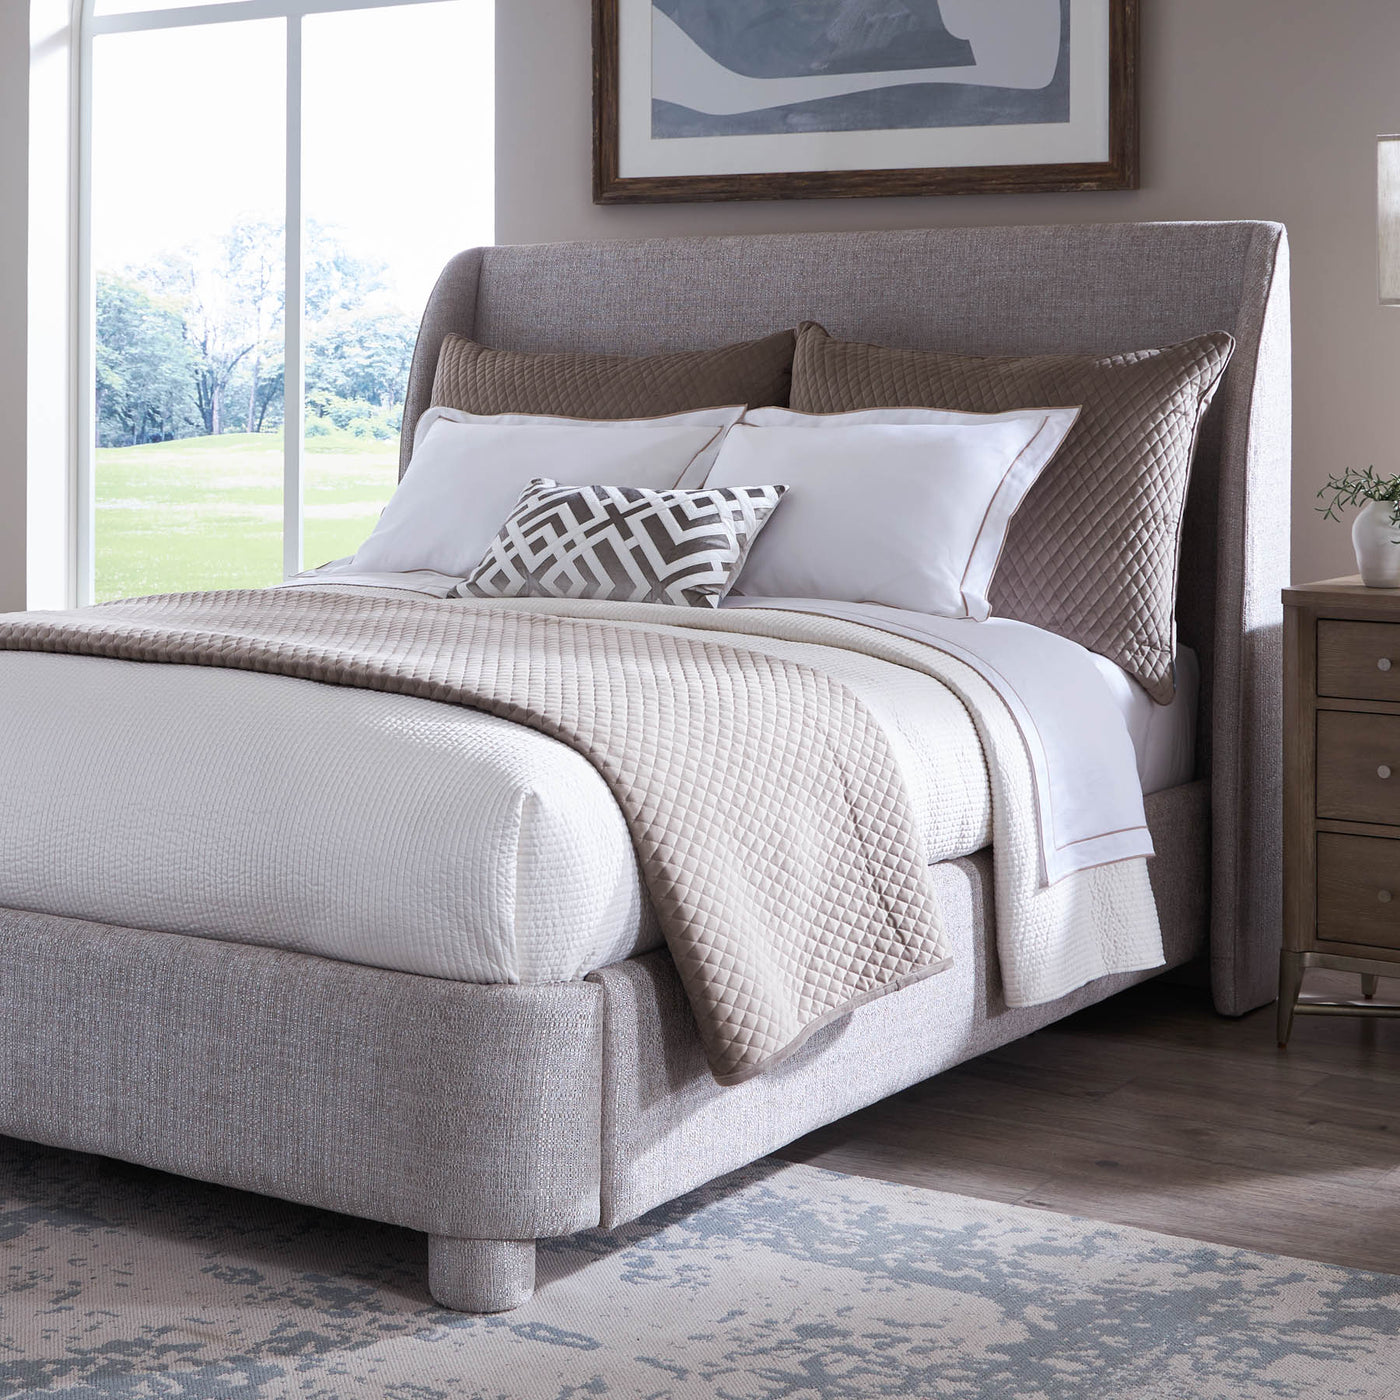 Serena Bed (Sand Woven Chenille / King)